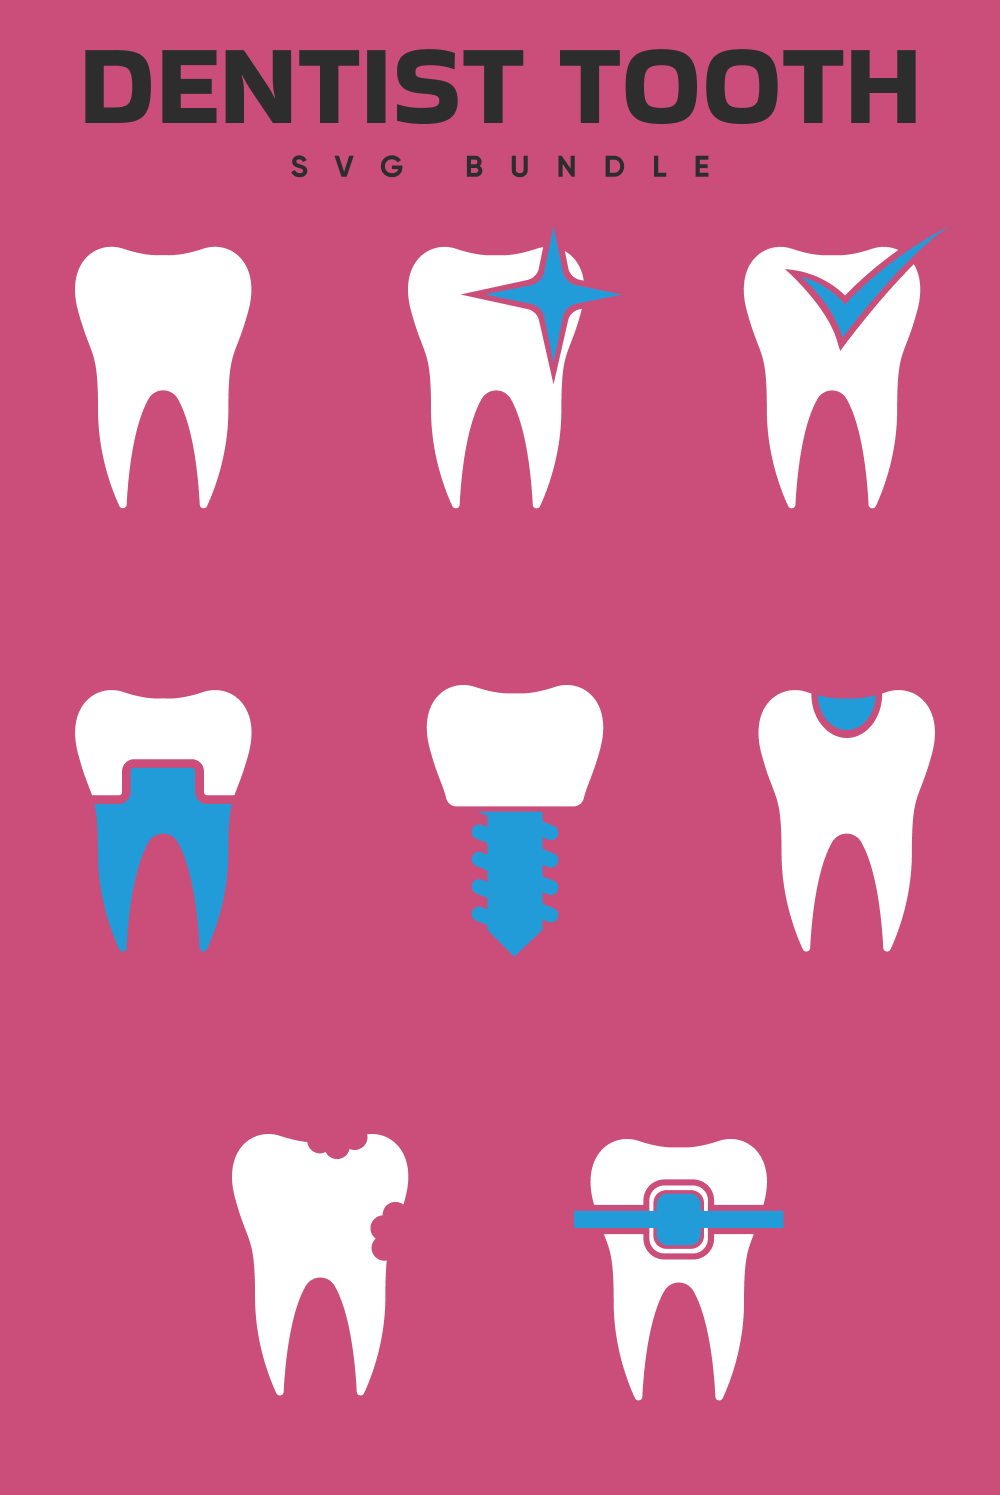 Eight dental teeth with caption on pink background.